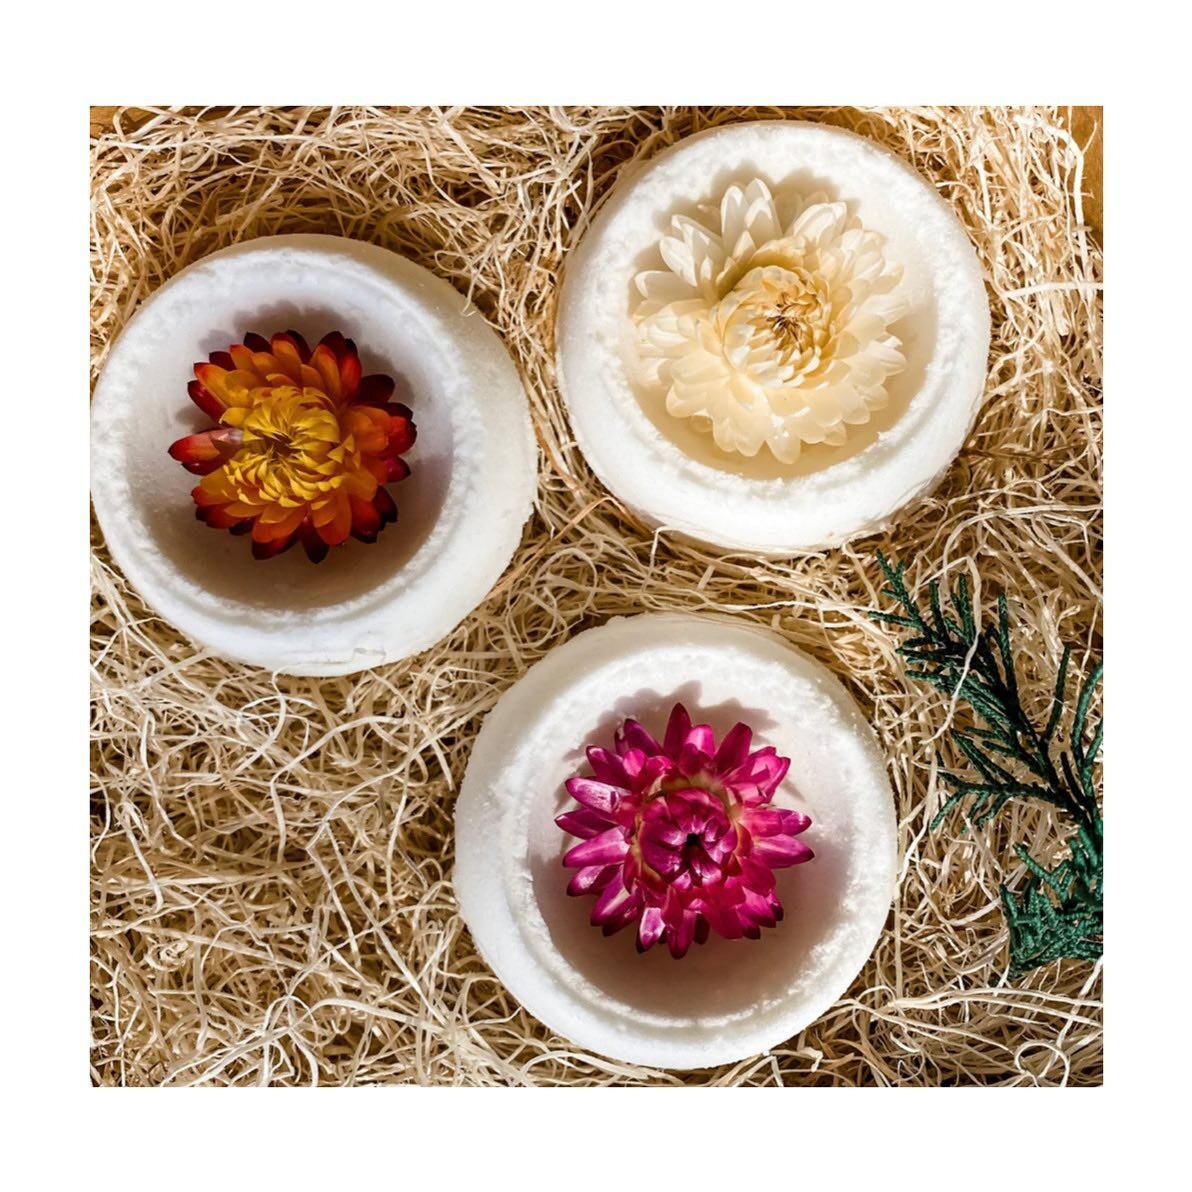 Soak in Joy Botanical bath bomb set. Clean ingredients &amp; sure to make you smile with each use. $37